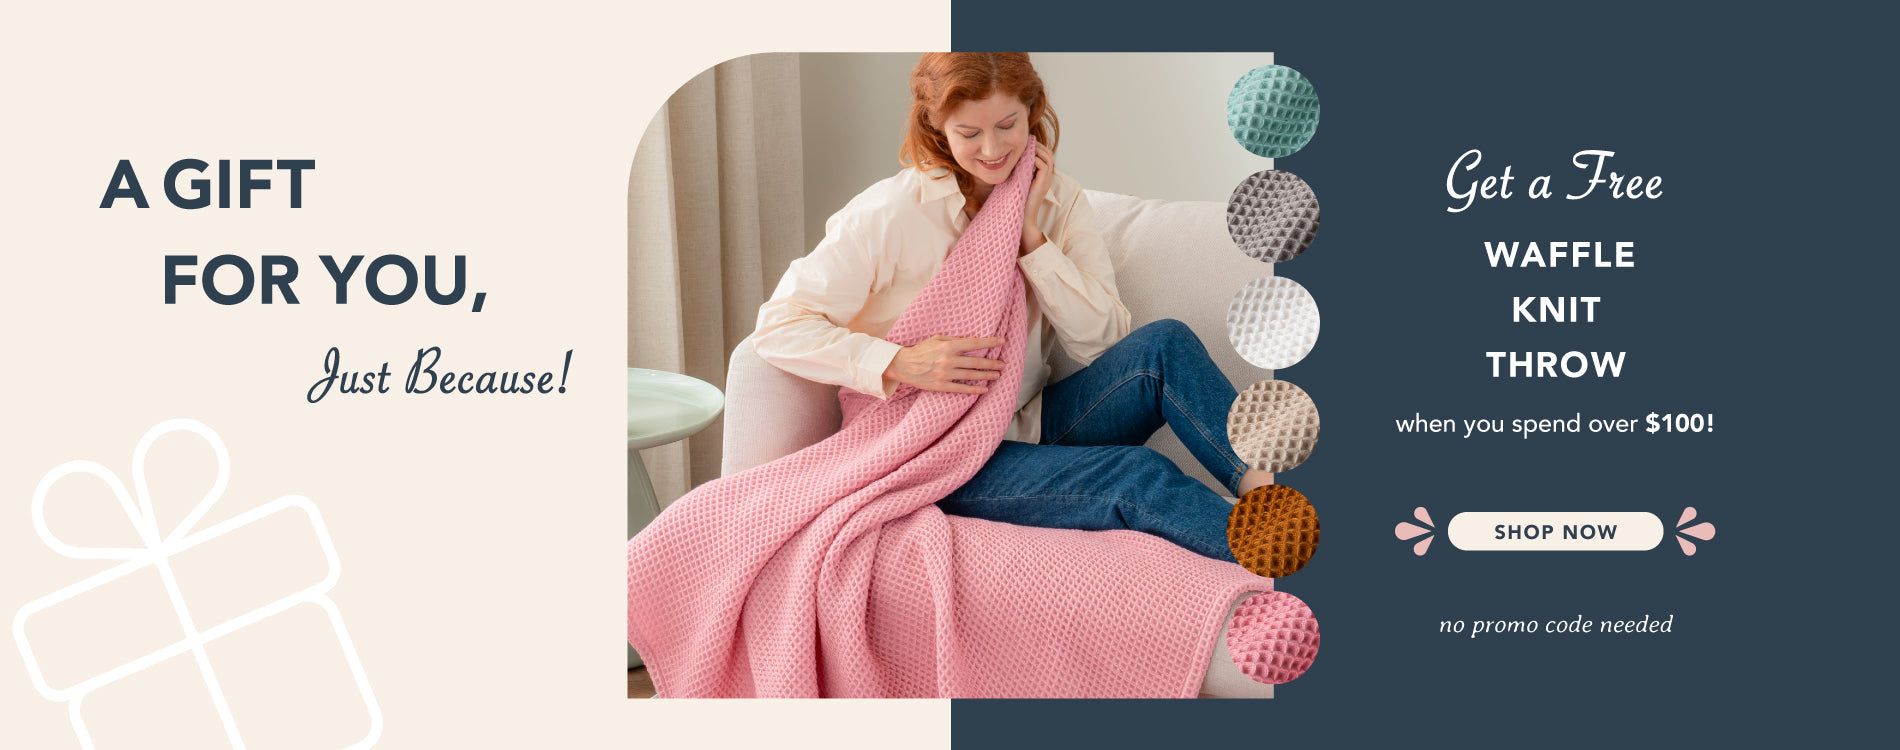 Gift With Purchase Promotion: Free Waffle Knit Throw When You Spend Over $100